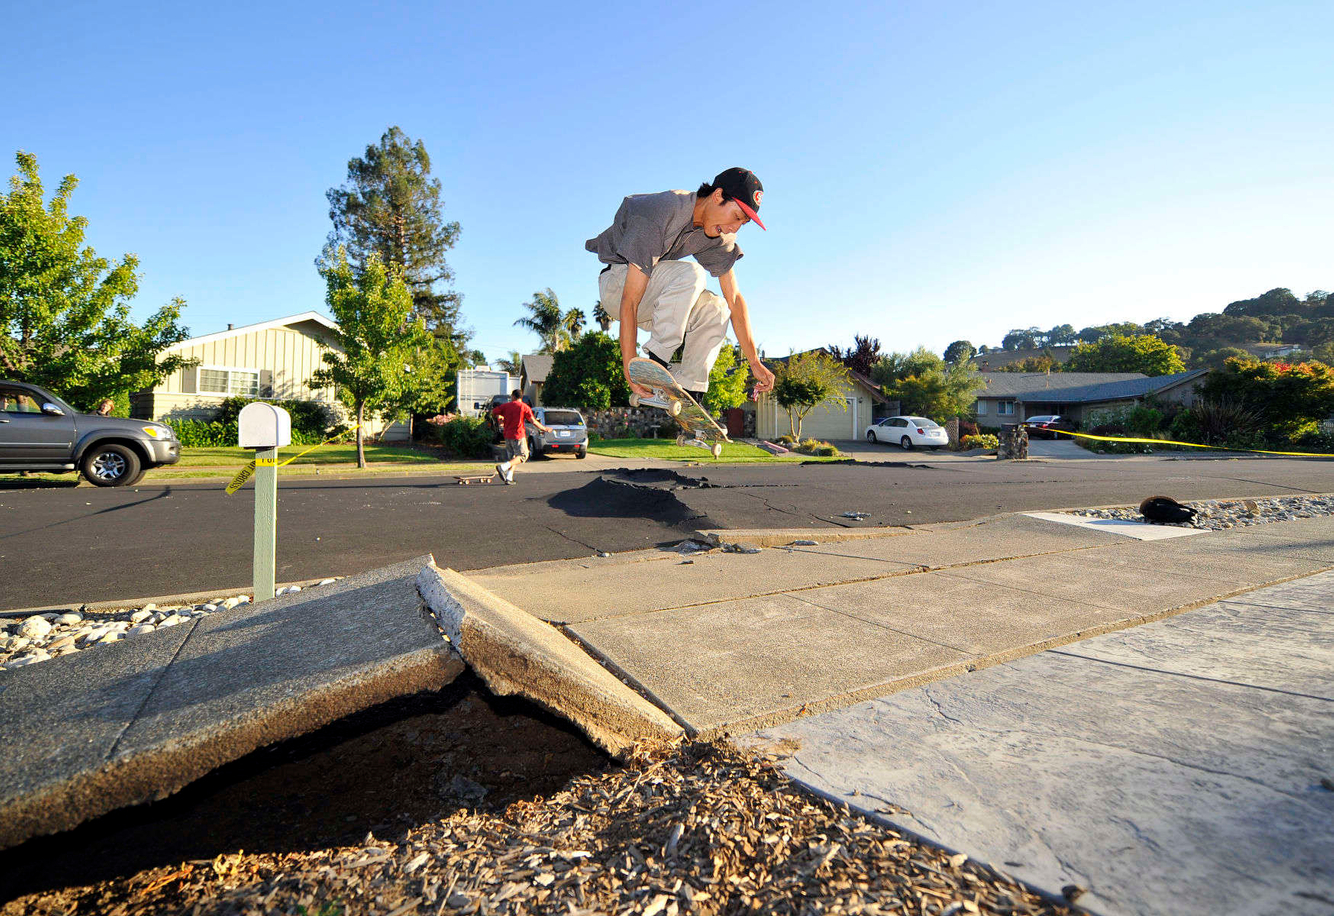 EARTHQUAKE: A skateboarder launches over a buckled sidewalk after a 6.1 Earthquake struck in Napa, California.